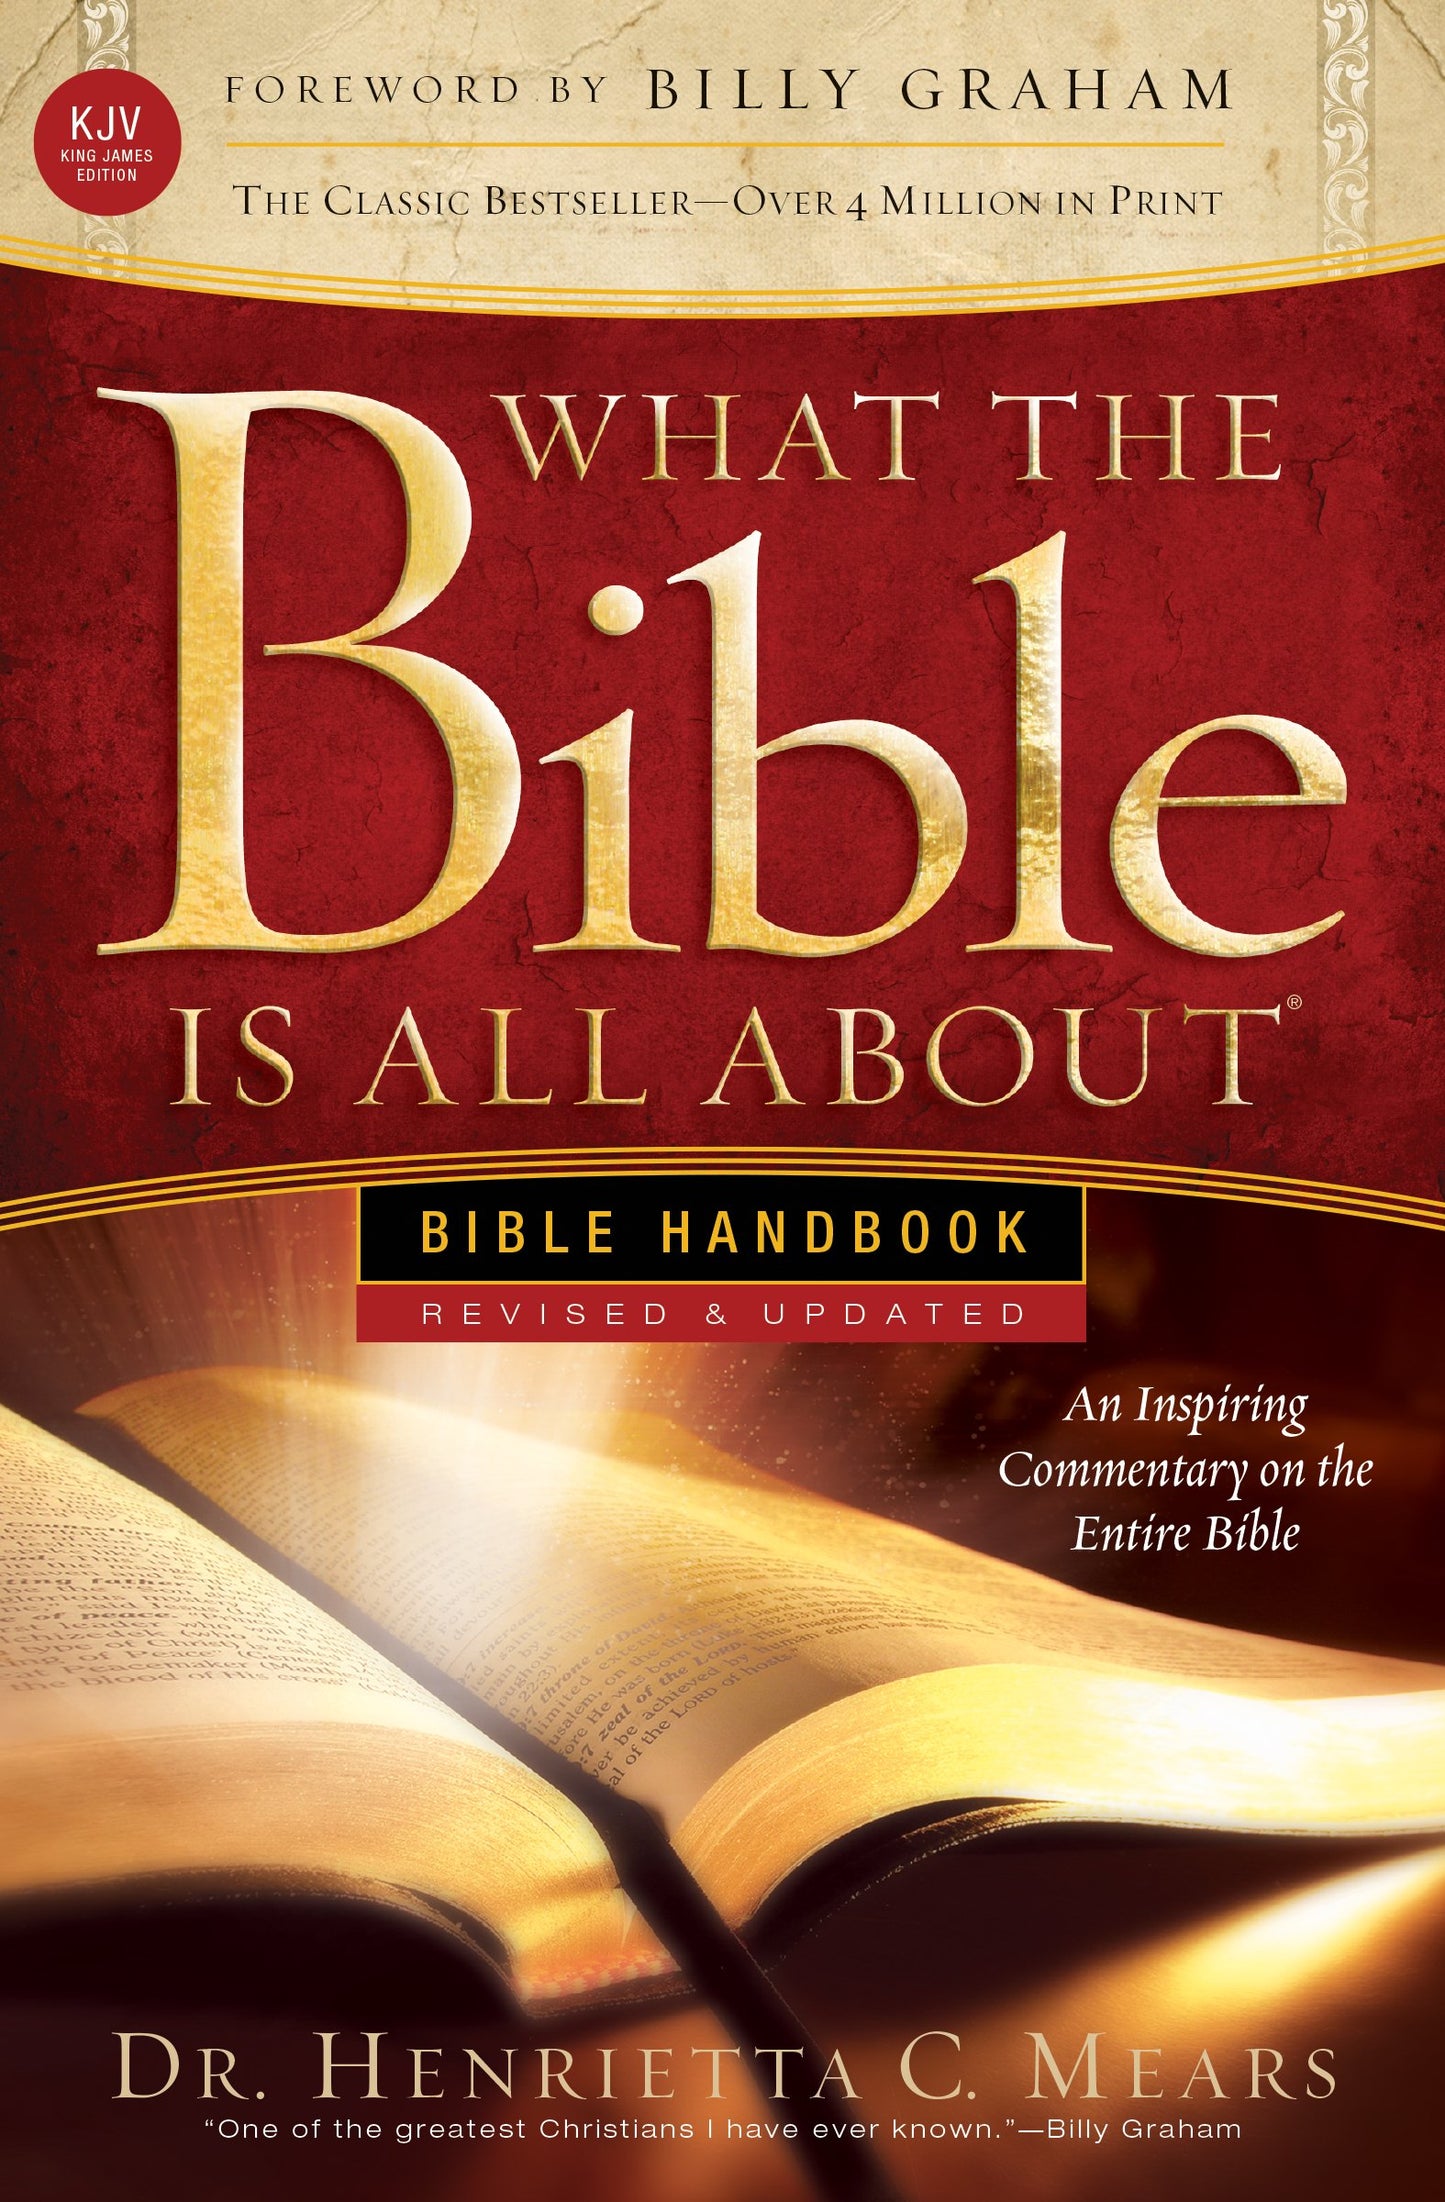 What the Bible is All About Bible Handbook by Henrietta C. Mears